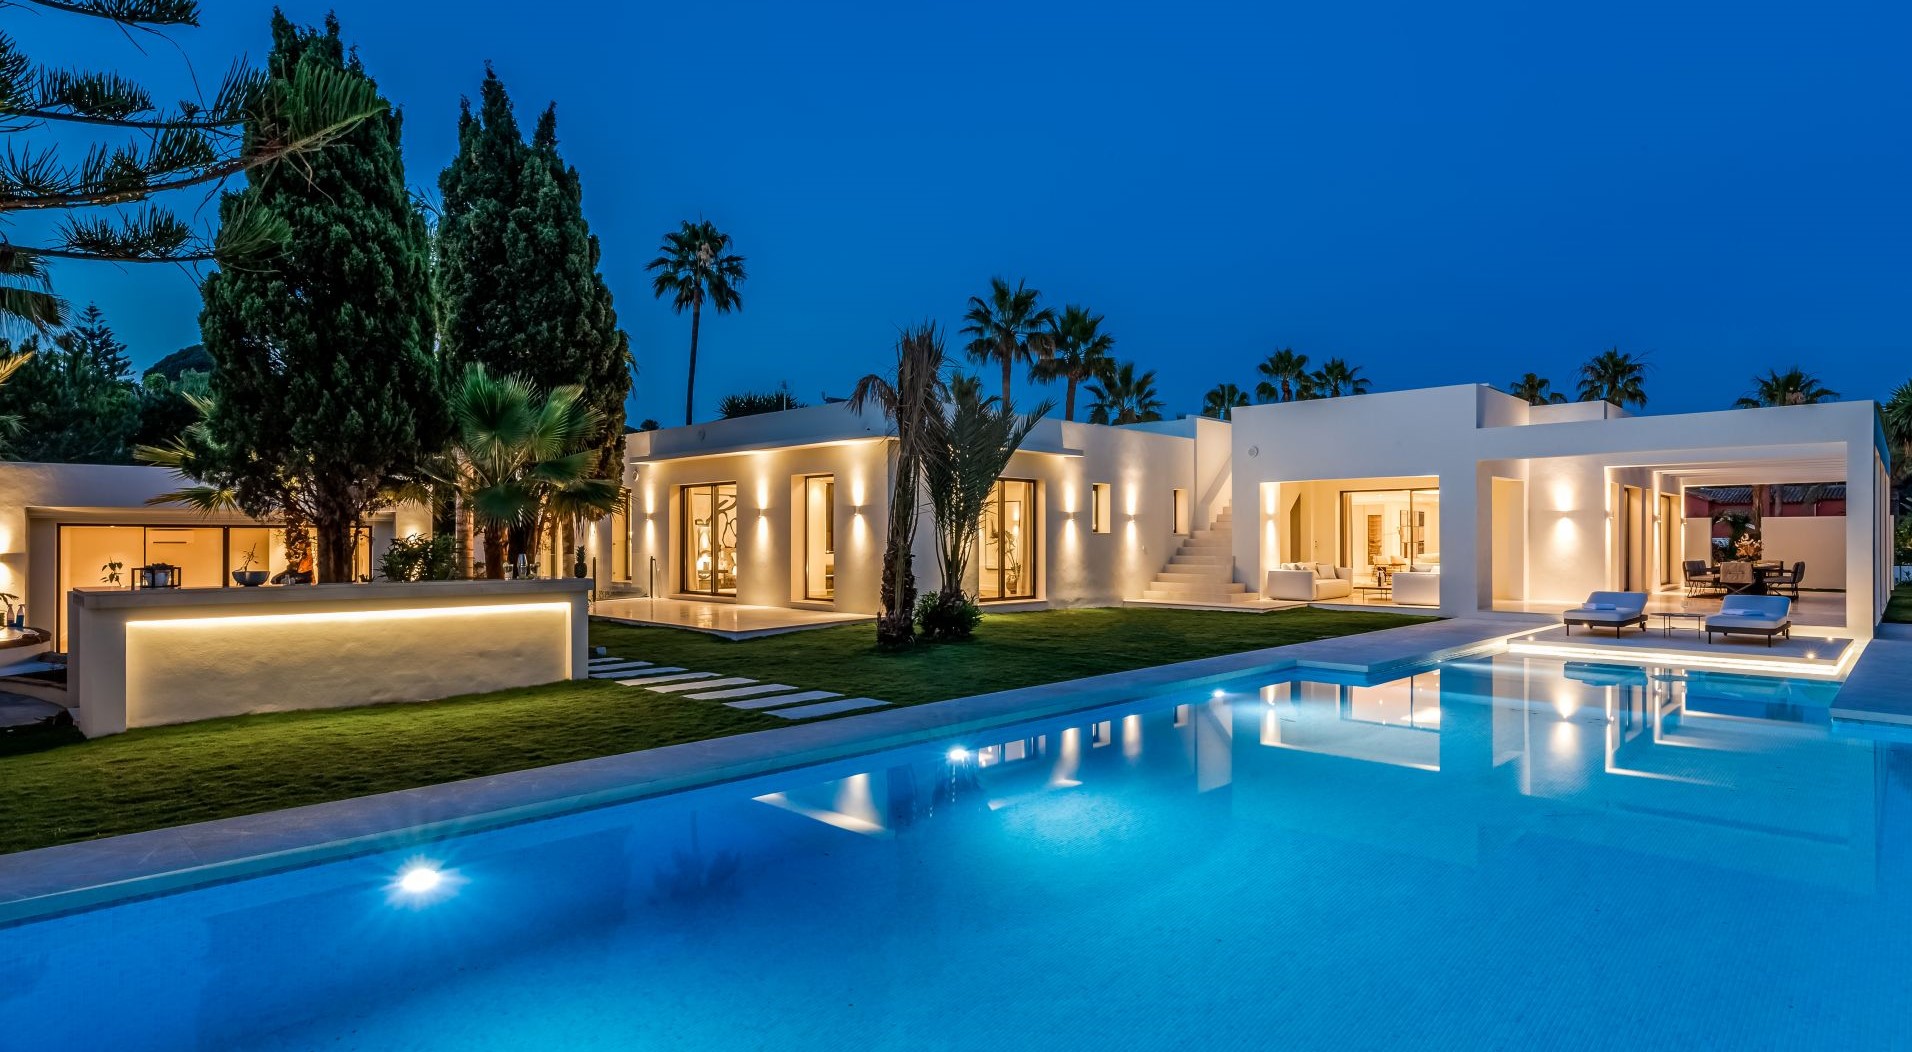 Unique, modern villa just steps from the beach